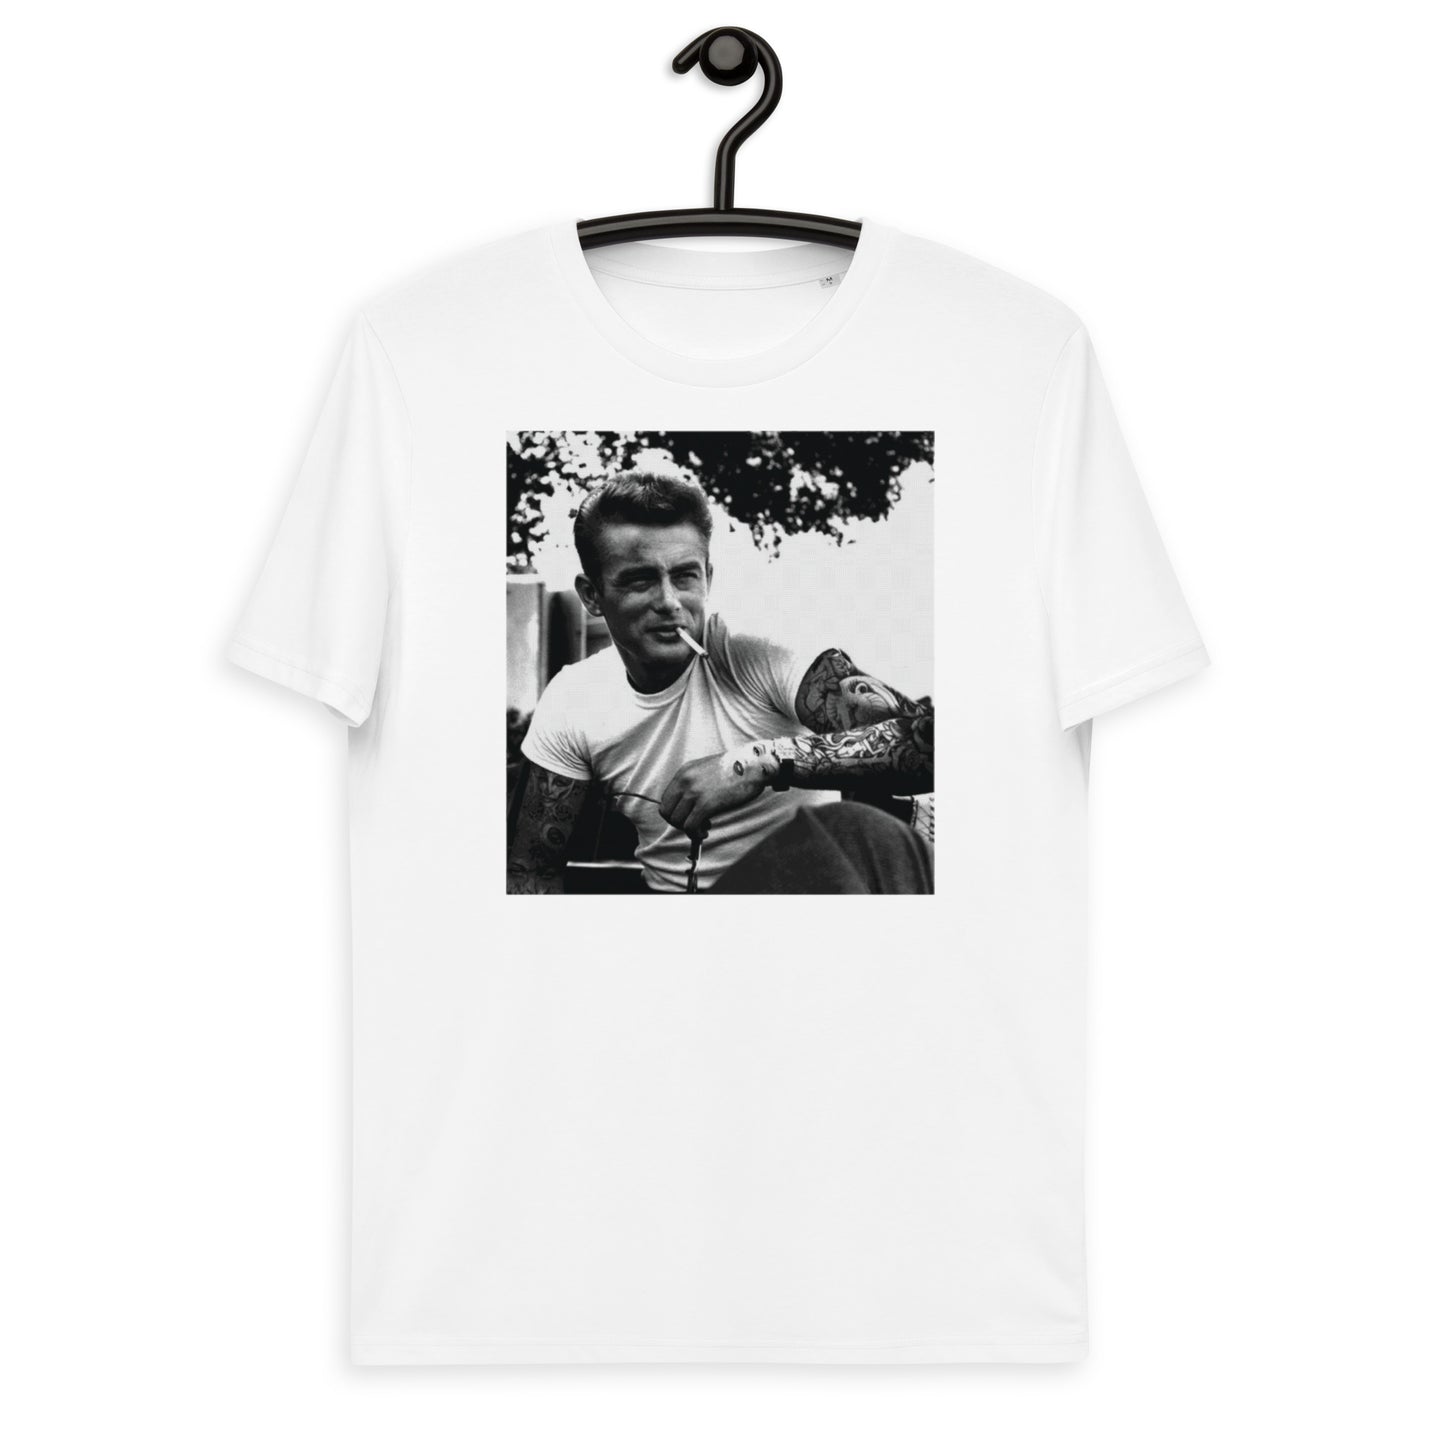 James Dean KiSS Unisex organic cotton t-shirt - Tattooed Rebel without a Cause 50s